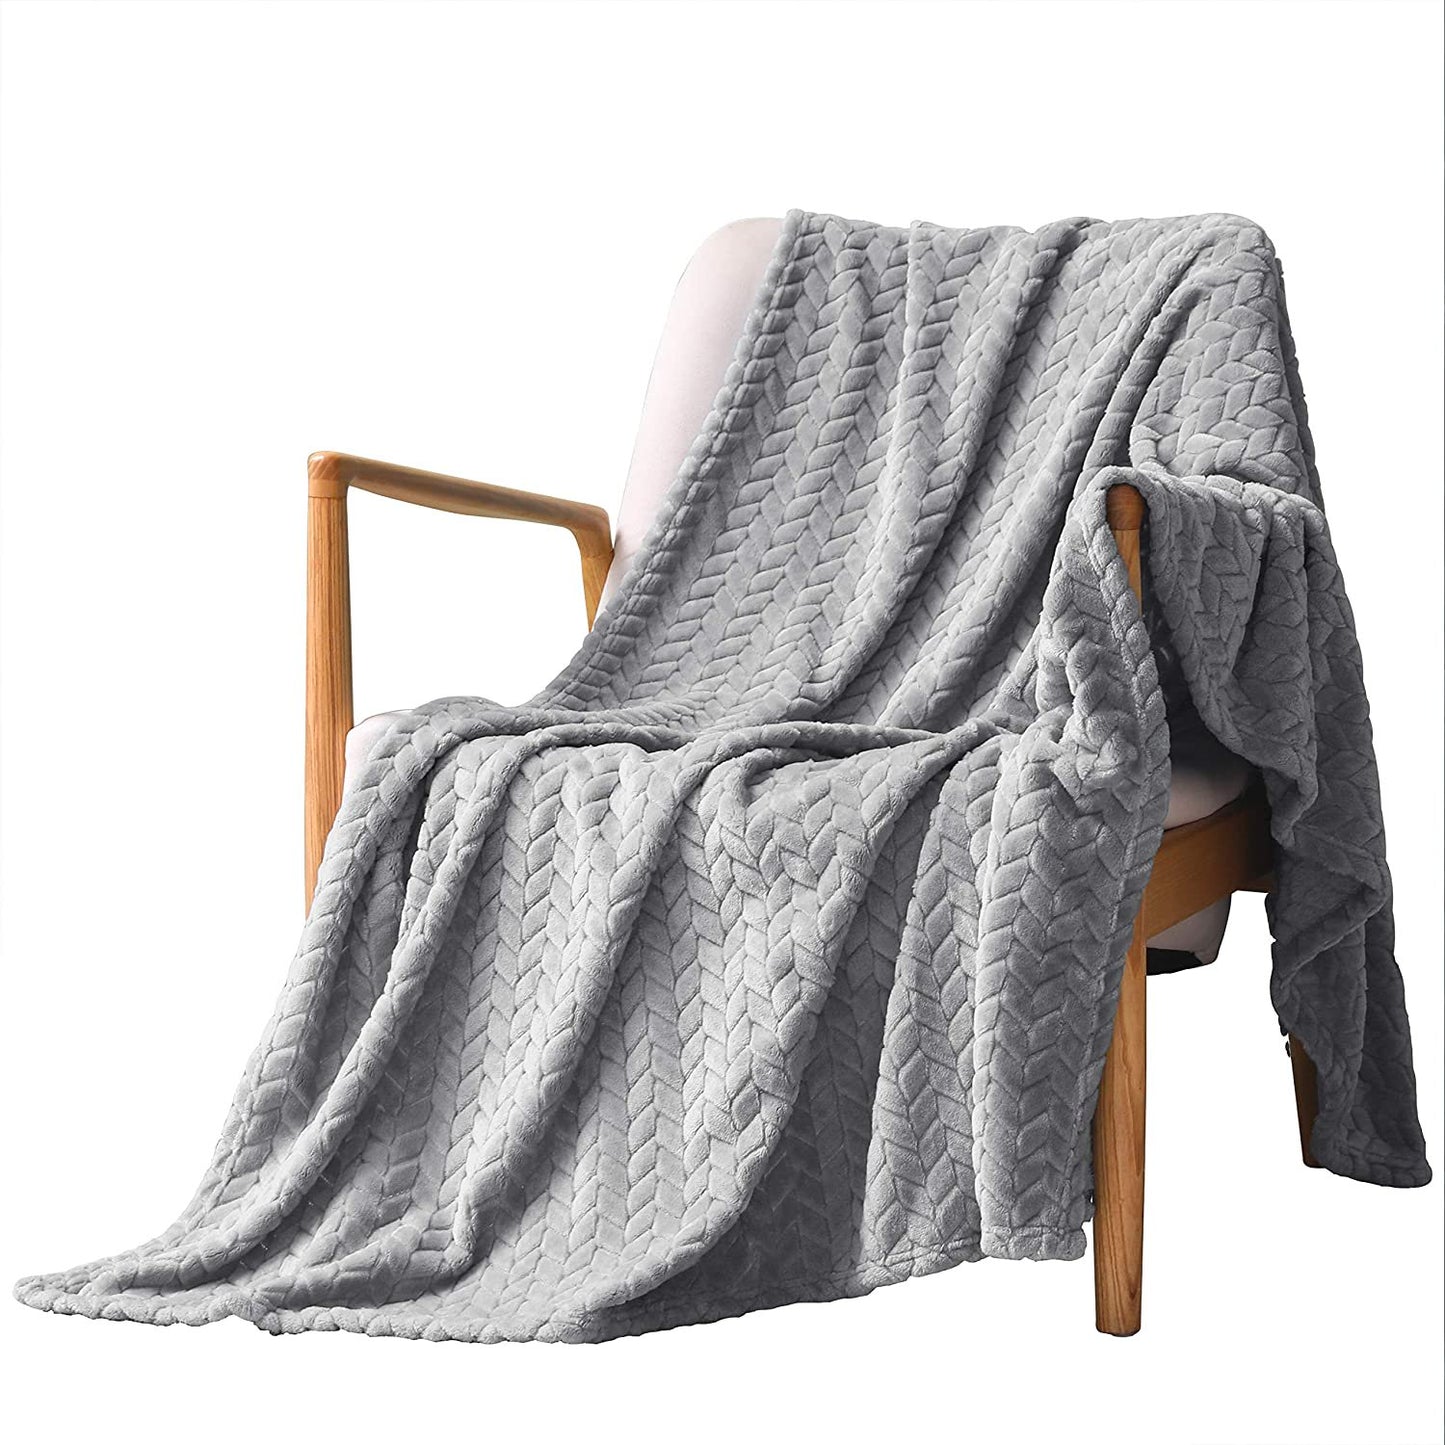 Exclusivo Mezcla Large Flannel Fleece Throw Blanket, Jacquard Weave Leaves Pattern (50" x 70", Light Gray) - Soft, Warm, Lightweight and Decorative